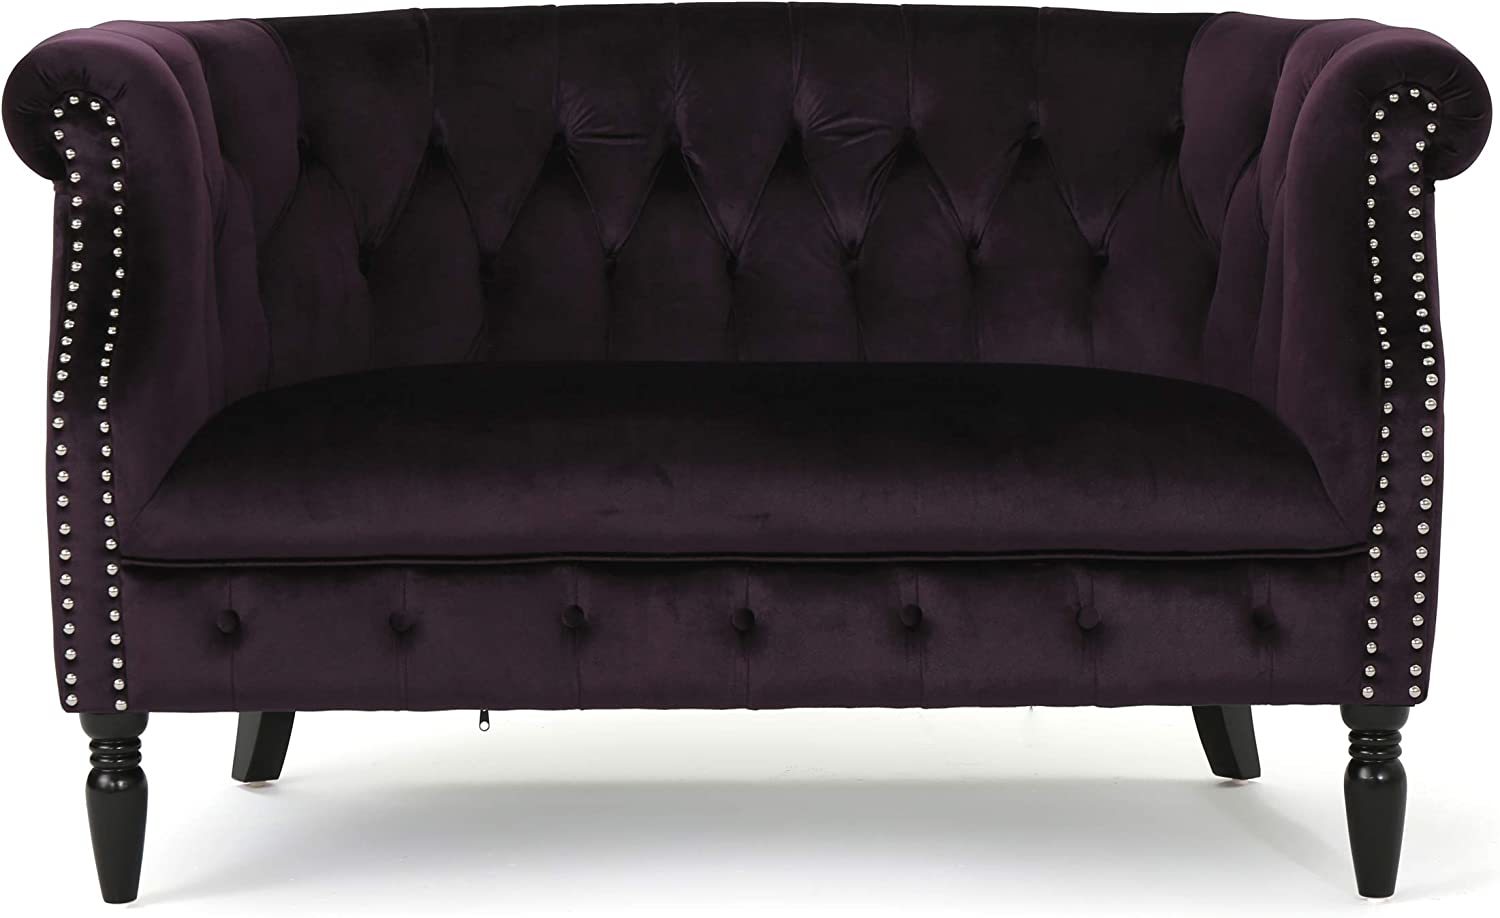 GDFStudio Melaina Tufted Chesterfield Velvet Loveseat with Scrolled Arms, - $645.99